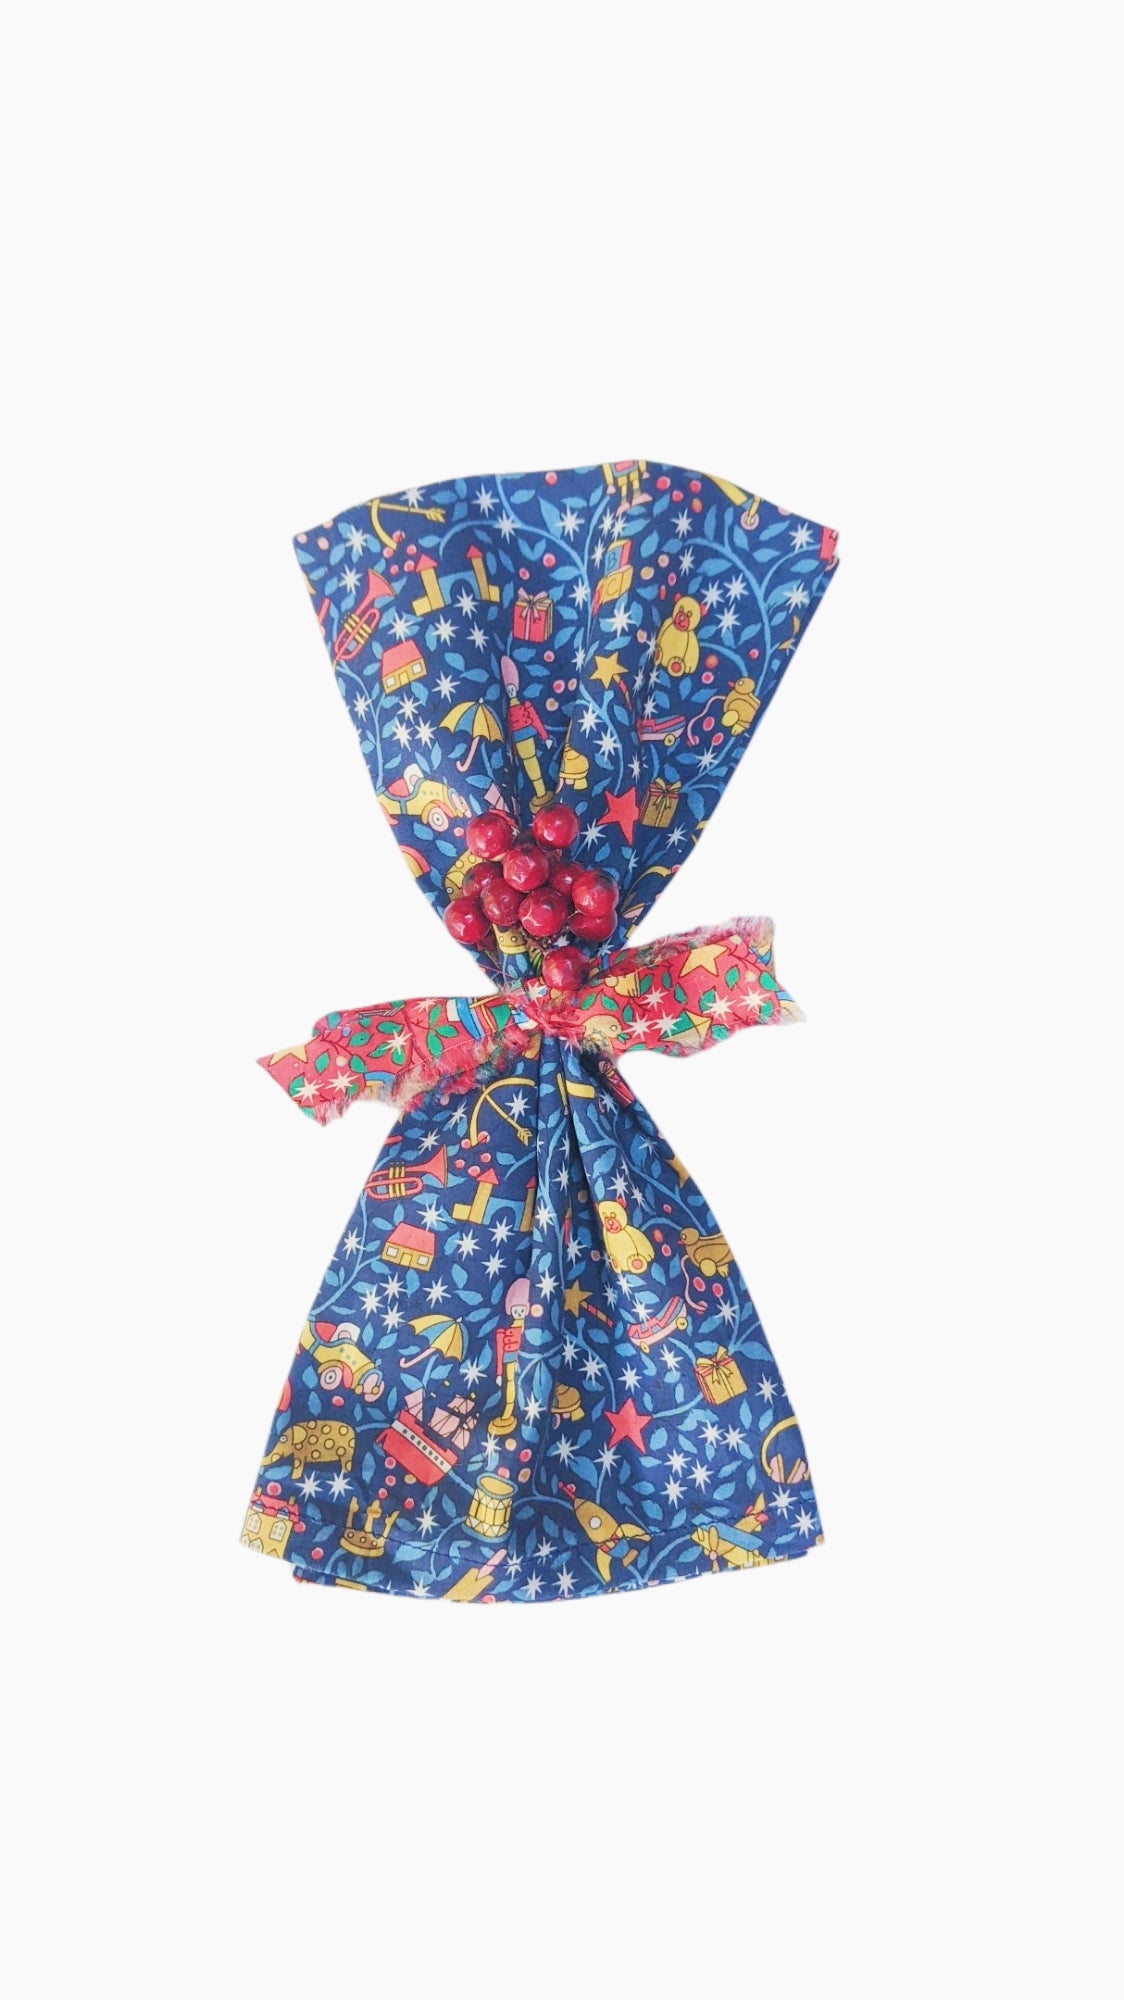 Two Limited Edition Festive Napkins - Featuring Liberty of London Fabric Blue Toys